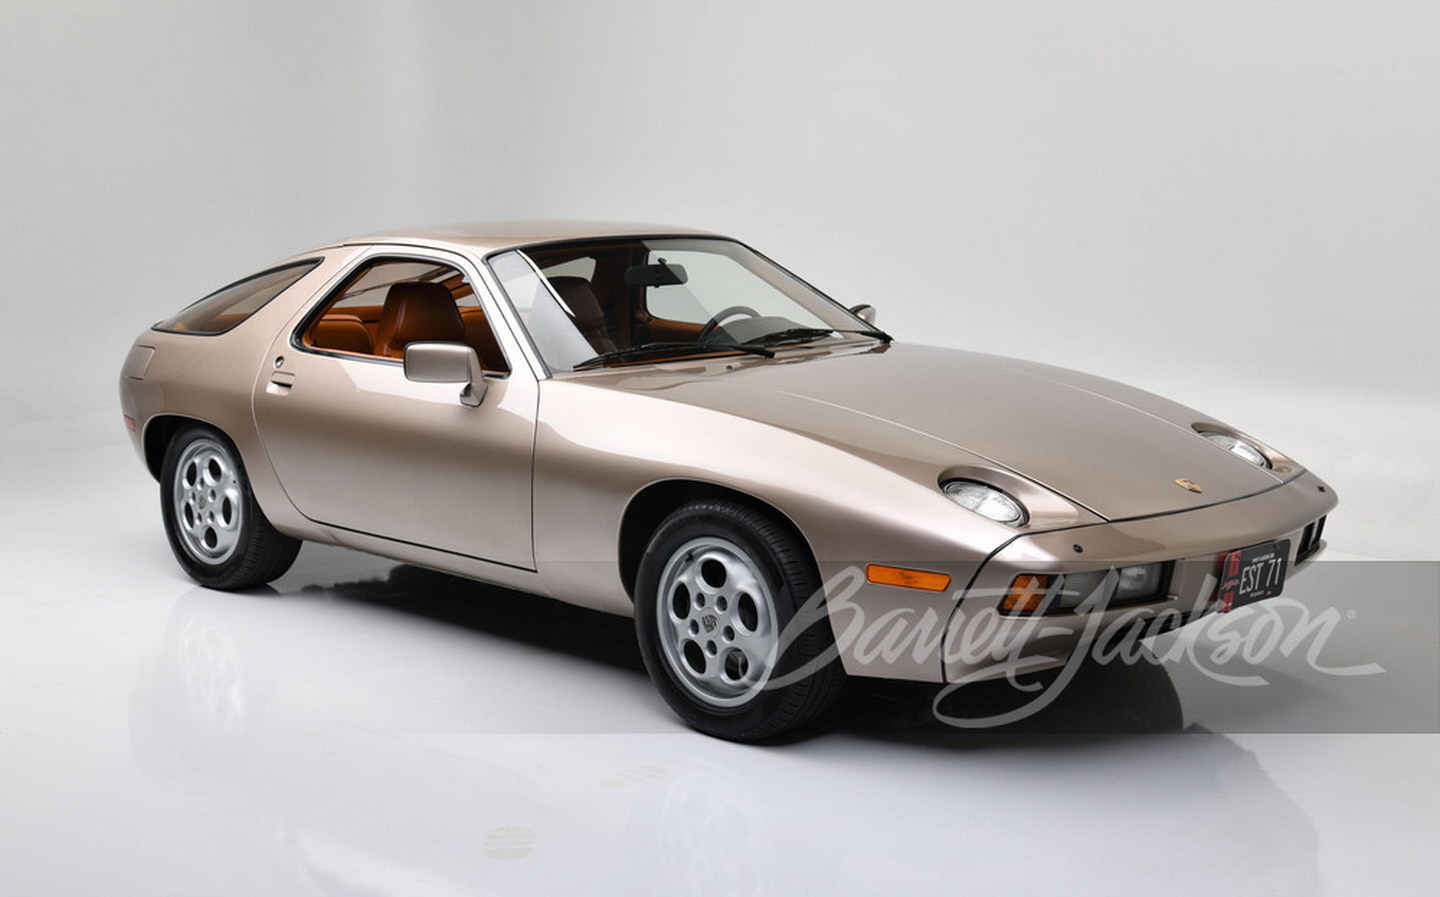 Porsche 928 driven by Tom Cruise in 'Risky Business' sells at Barrett-Jackson auction